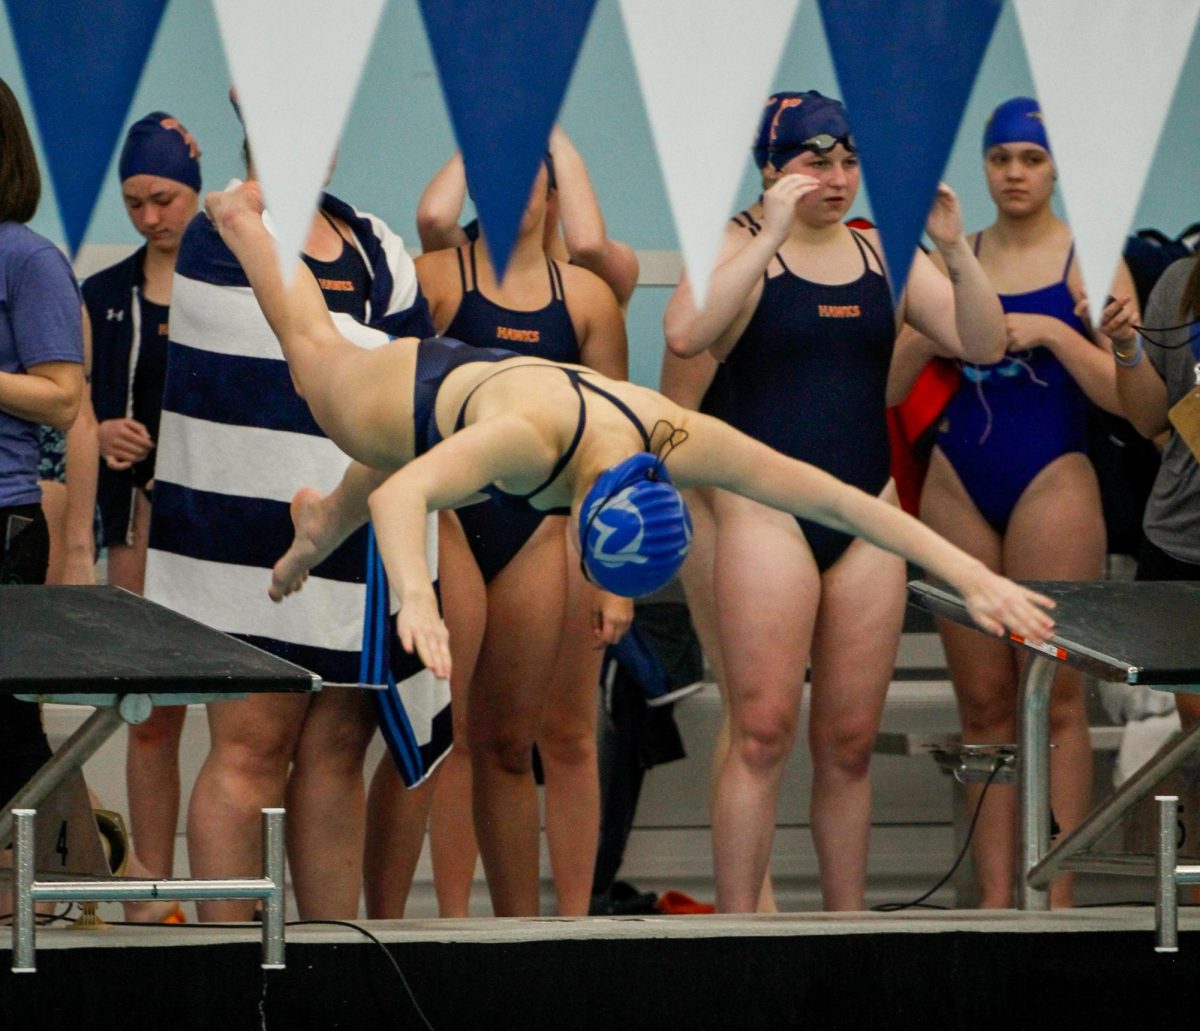 Senior Lydia Fink dives off the block during the Olathe City Meet on March 21.